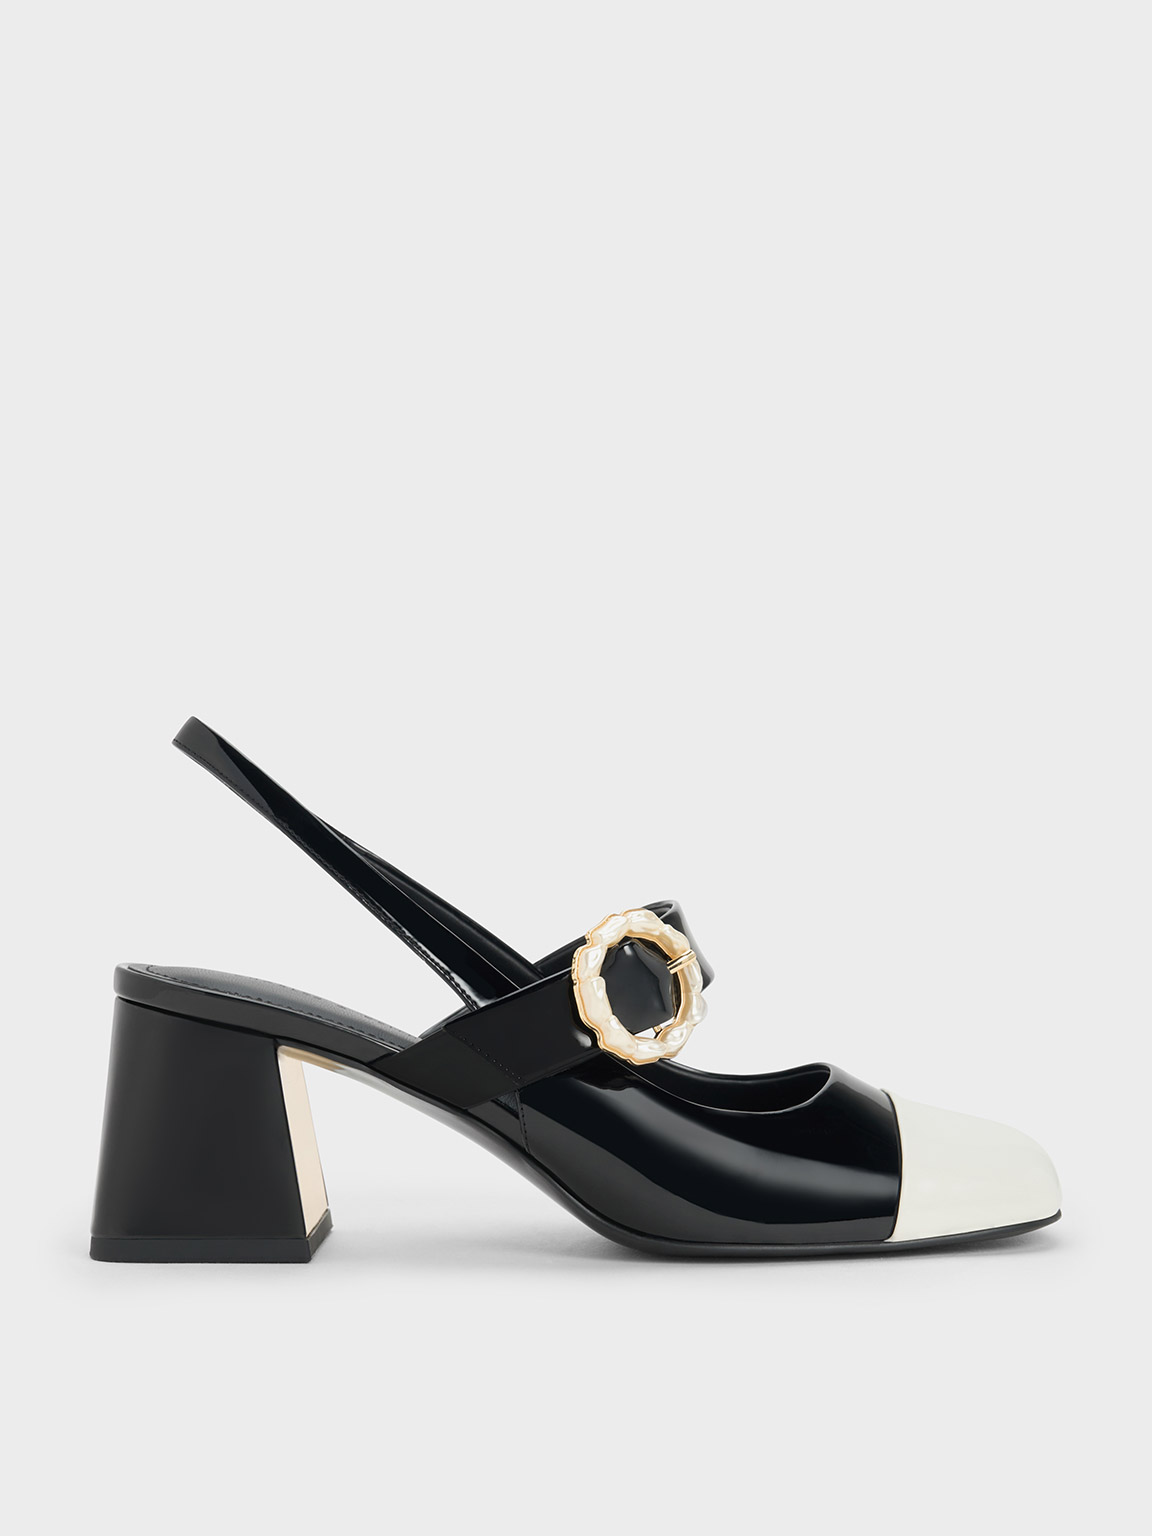 Charles & Keith - Women's Patent Two-Tone Pearl Buckle Slingback Pumps, Black Patent, US 6